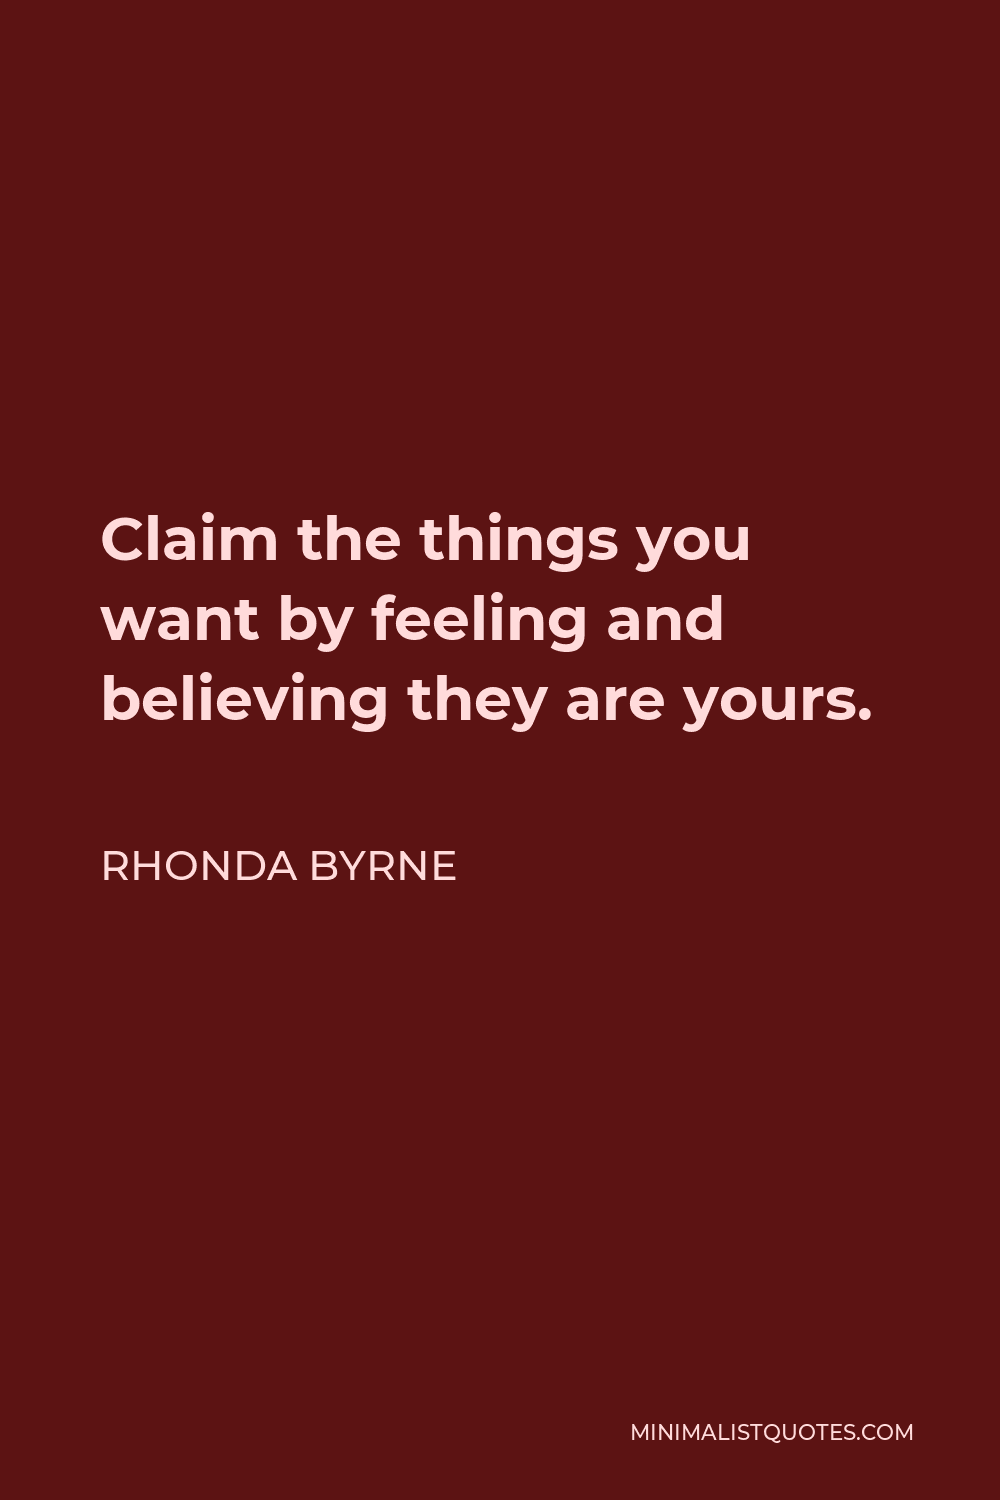 Rhonda Byrne Quote: Claim the things you want by feeling and believing ...